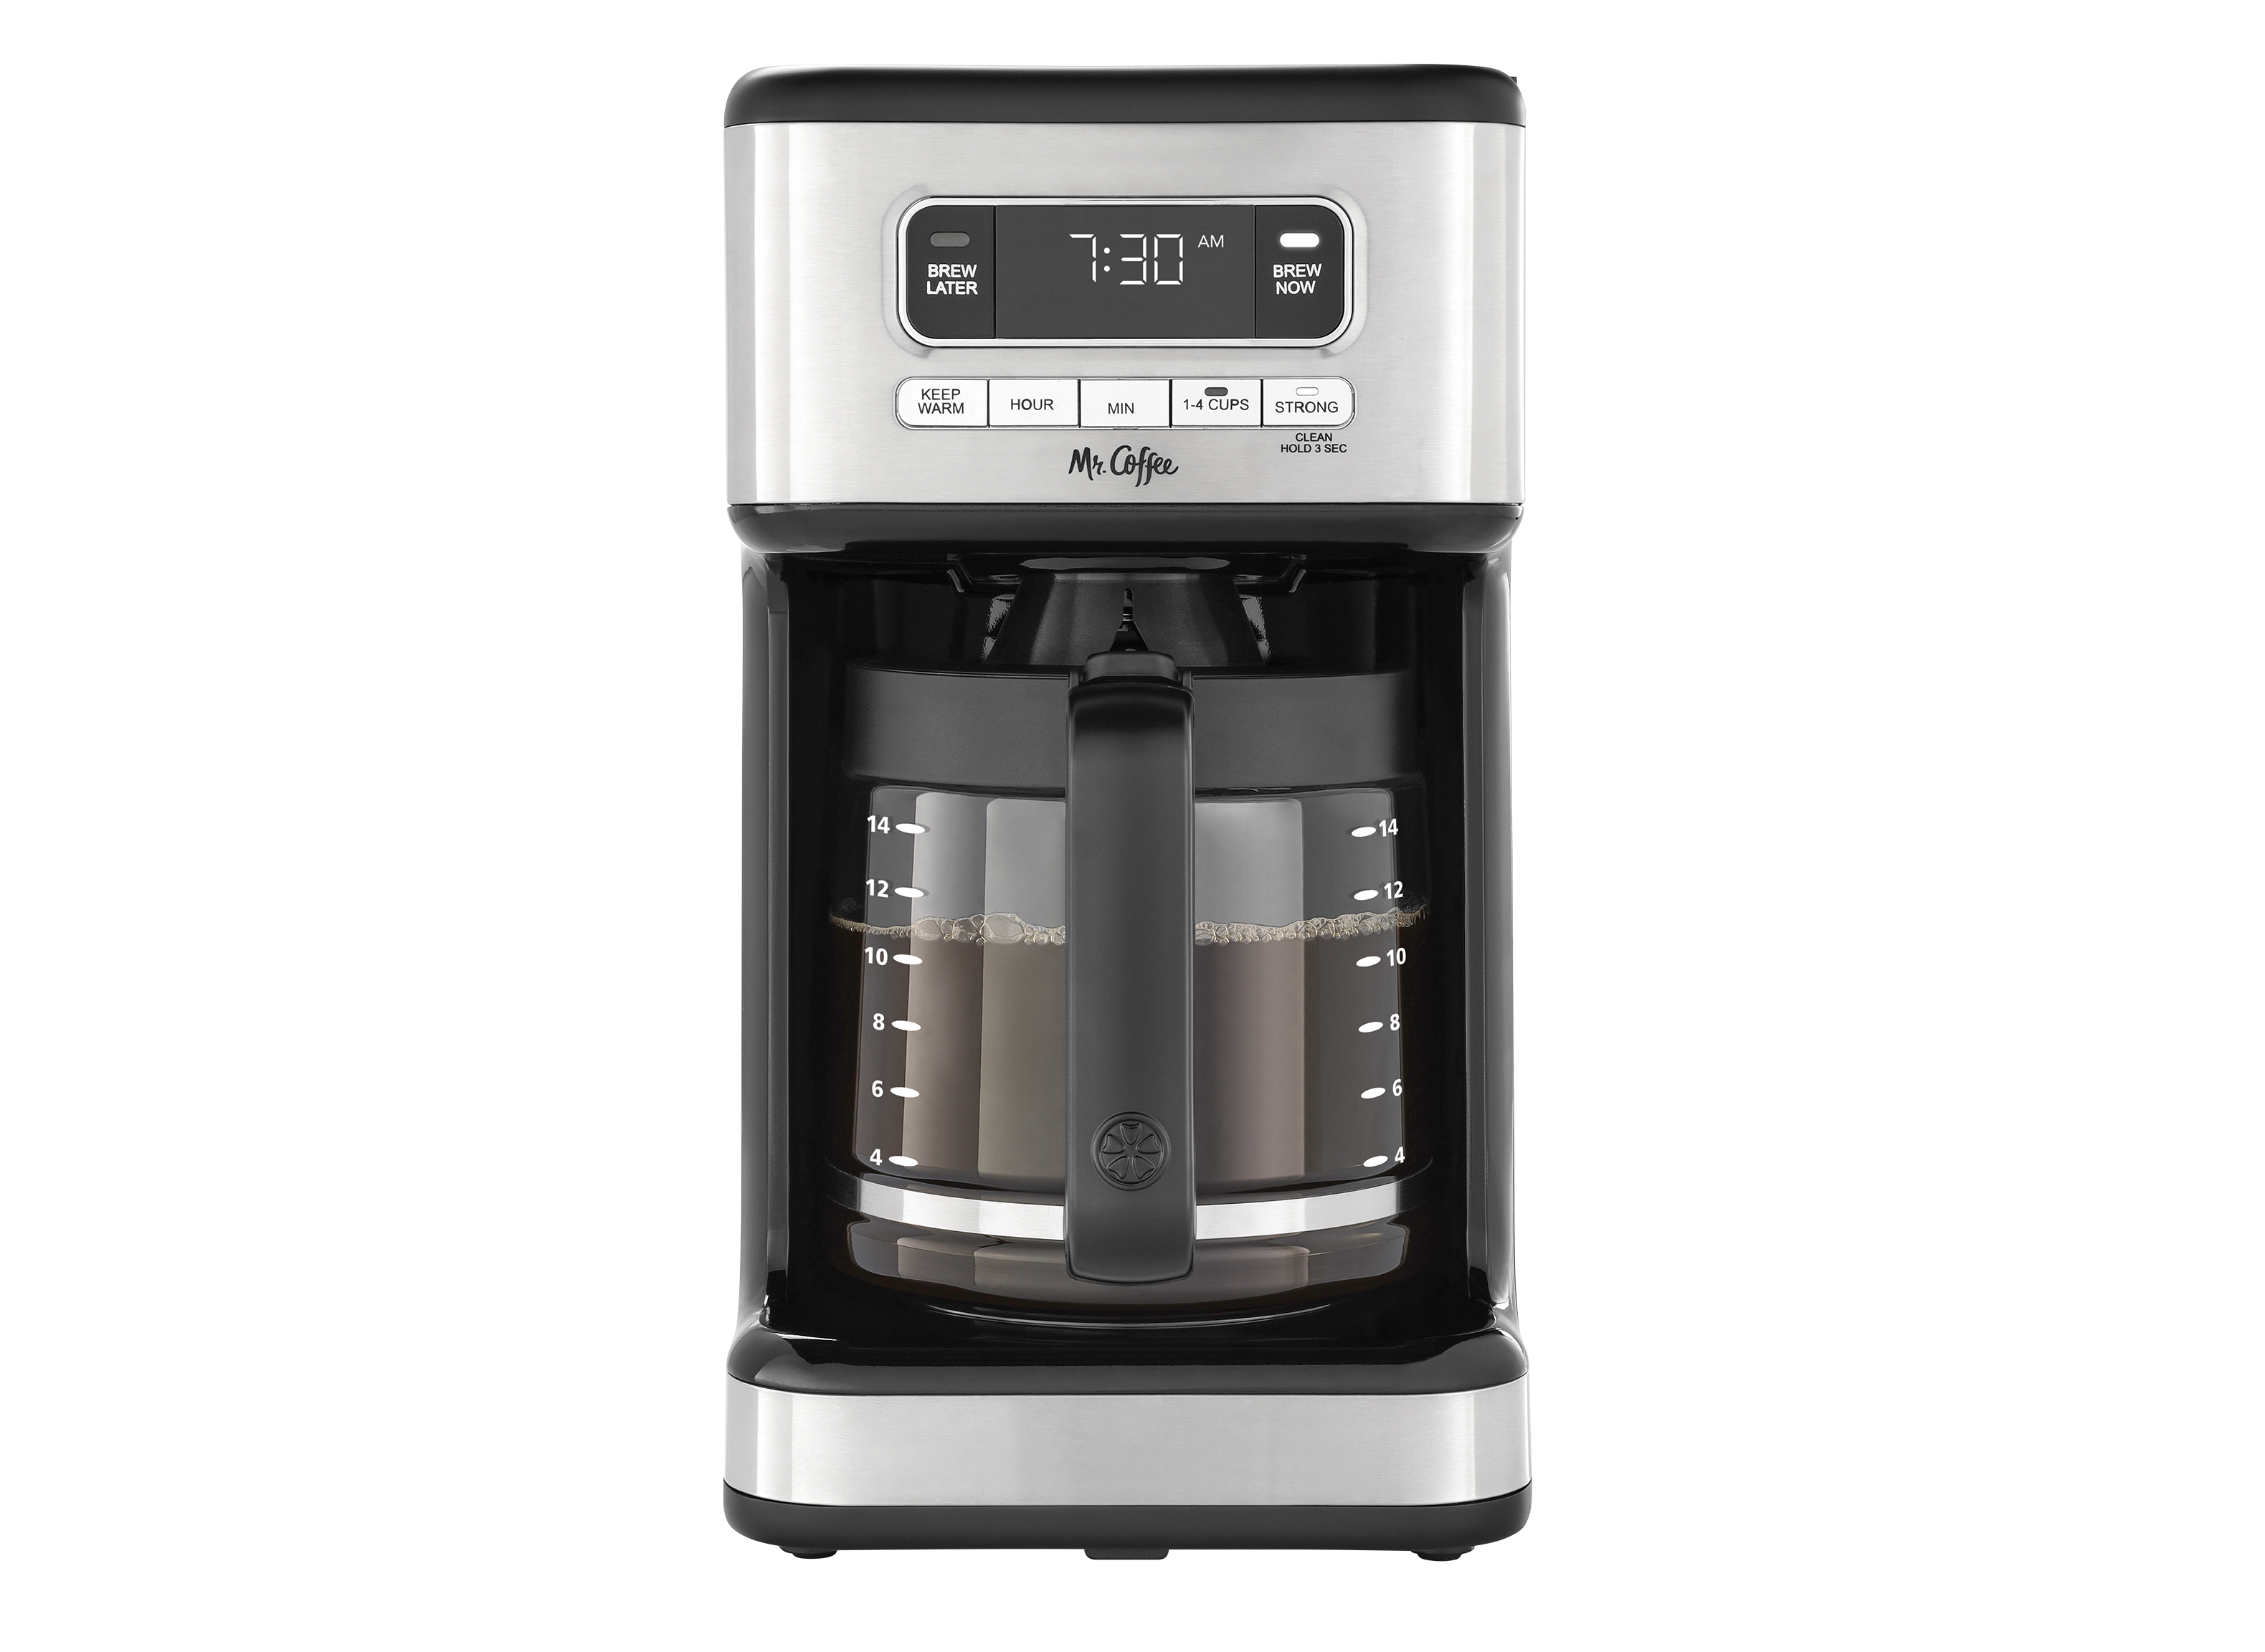 https://crdms.images.consumerreports.org/prod/products/cr/models/406303-drip-coffee-makers-with-carafe-mr-coffee-14-cup-programable-2143561-10029215.png